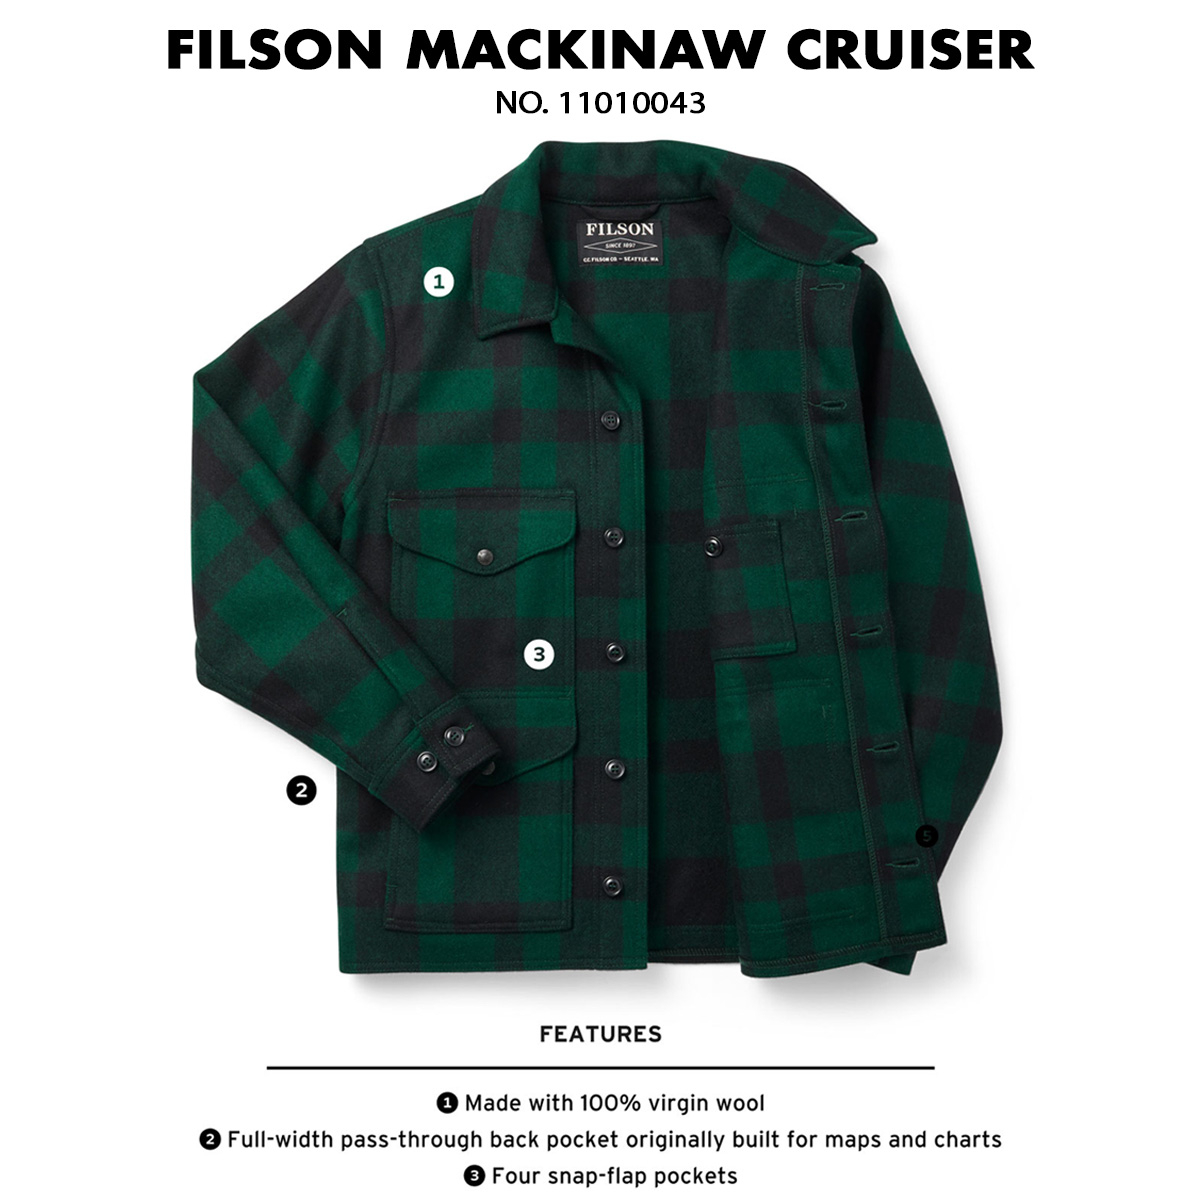 Filson Mackinaw Cruiser Jacket Green Black, Made of 100% virgin Mackinaw Wool for comfort, natural water-repellency and insulating warmth in any weather conditions.